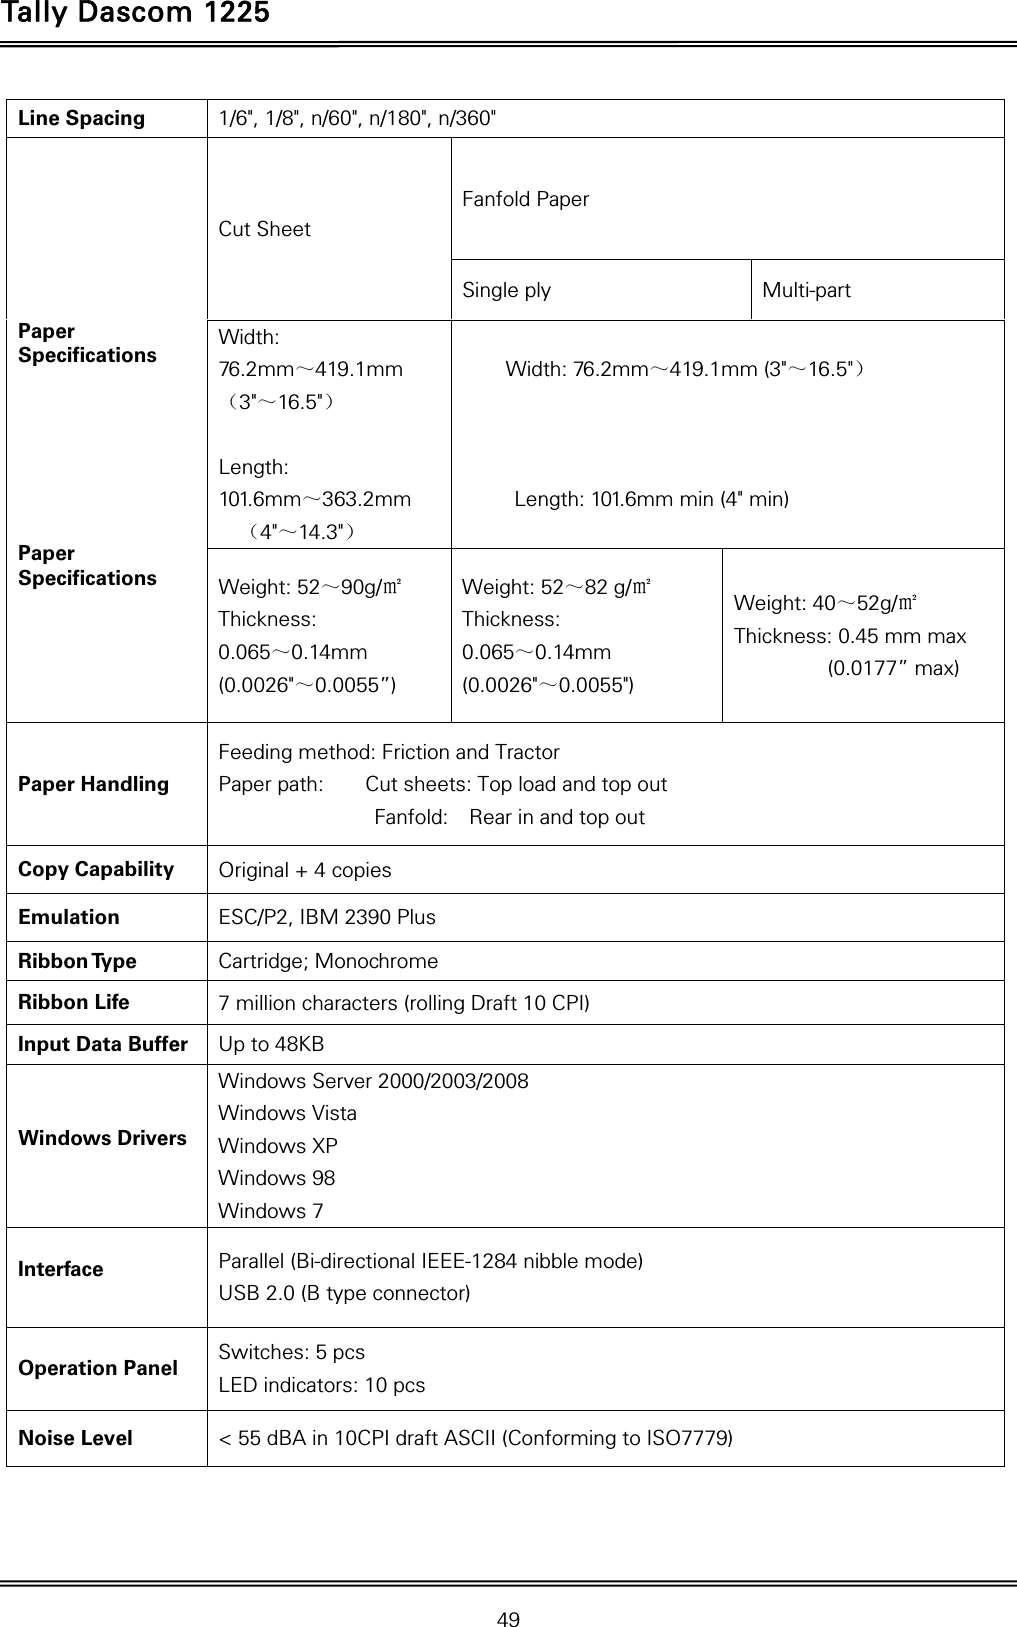 Tally Dascom 1225   49  Line Spacing  1/6&quot;, 1/8&quot;, n/60&quot;, n/180&quot;, n/360&quot;    Paper Specifications        Paper Specifications  Cut Sheet Fanfold Paper Single ply  Multi-part Width: 76.2mm～419.1mm （3&quot;～16.5&quot;）  Length: 101.6mm～363.2mm （4&quot;～14.3&quot;）   Width: 76.2mm～419.1mm (3&quot;～16.5&quot;）    Length: 101.6mm min (4&quot; min) Weight: 52～90g/㎡ Thickness: 0.065～0.14mm (0.0026&quot;～0.0055”) Weight: 52～82 g/㎡ Thickness:  0.065～0.14mm (0.0026&quot;～0.0055&quot;) Weight: 40～52g/㎡ Thickness: 0.45 mm max          (0.0177” max) Paper Handling Feeding method: Friction and Tractor Paper path:        Cut sheets: Top load and top out Fanfold:  Rear in and top out Copy Capability  Original + 4 copies   Emulation  ESC/P2, IBM 2390 Plus Ribbon Type  Cartridge; Monochrome Ribbon Life  7 million characters (rolling Draft 10 CPI) Input Data Buffer  Up to 48KB Windows Drivers Windows Server 2000/2003/2008 Windows Vista Windows XP Windows 98 Windows 7 Interface  Parallel (Bi-directional IEEE-1284 nibble mode) USB 2.0 (B type connector) Operation Panel  Switches: 5 pcs LED indicators: 10 pcs Noise Level  &lt; 55 dBA in 10CPI draft ASCII (Conforming to ISO7779) 